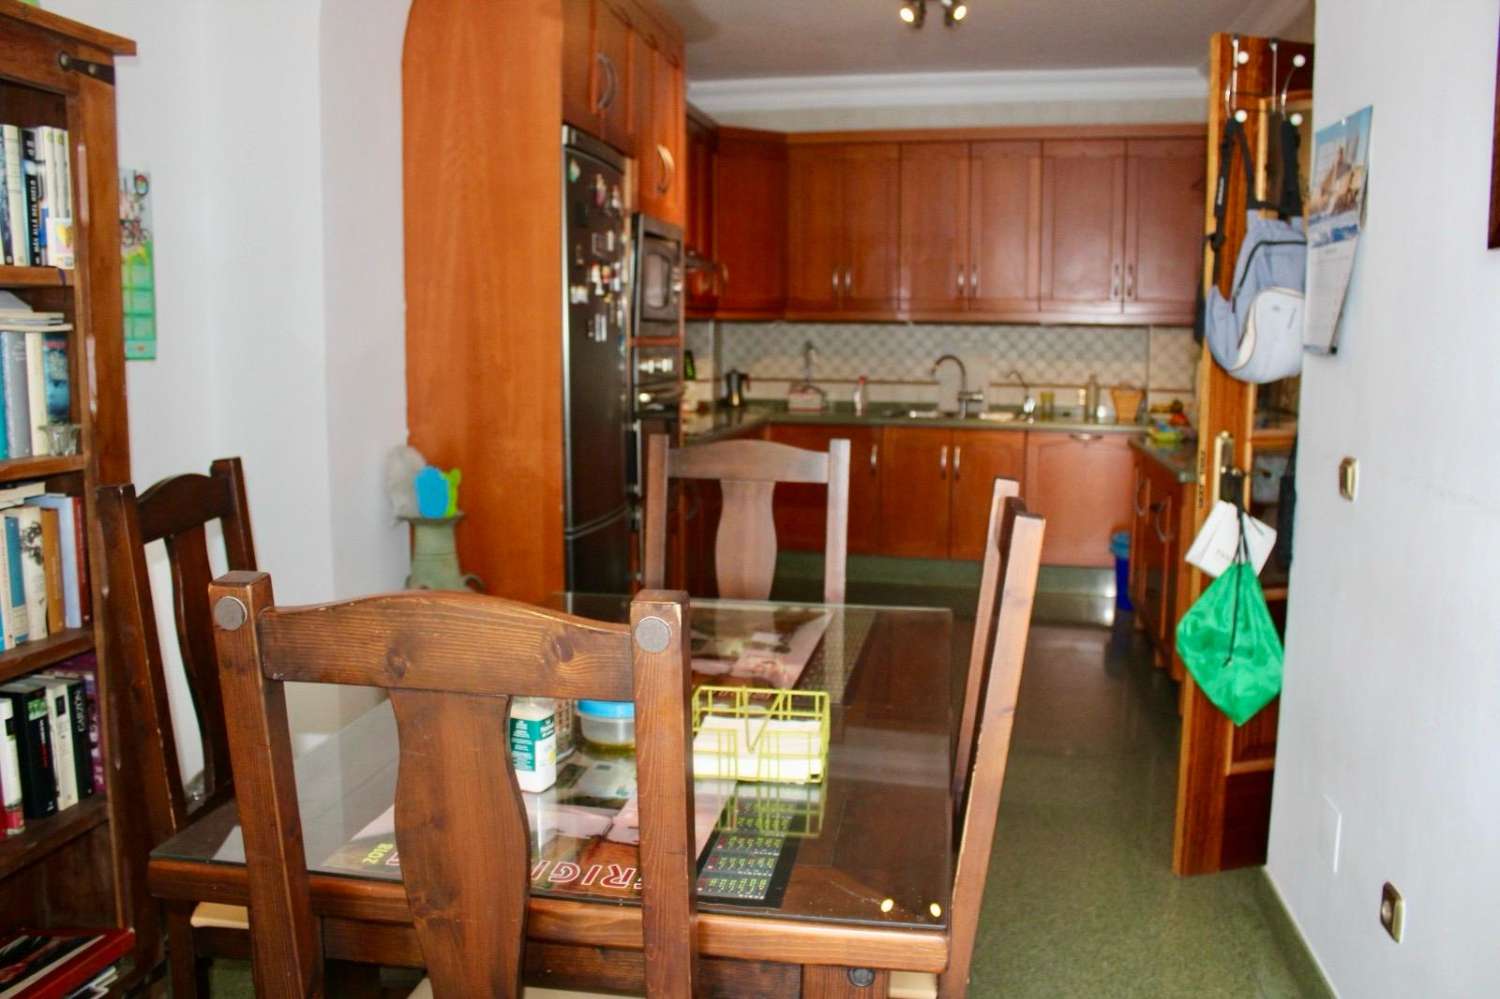 SPACIOUS TOWNHOUSE WITH INDEPENDENT APARTMENT - FRIGILIANA